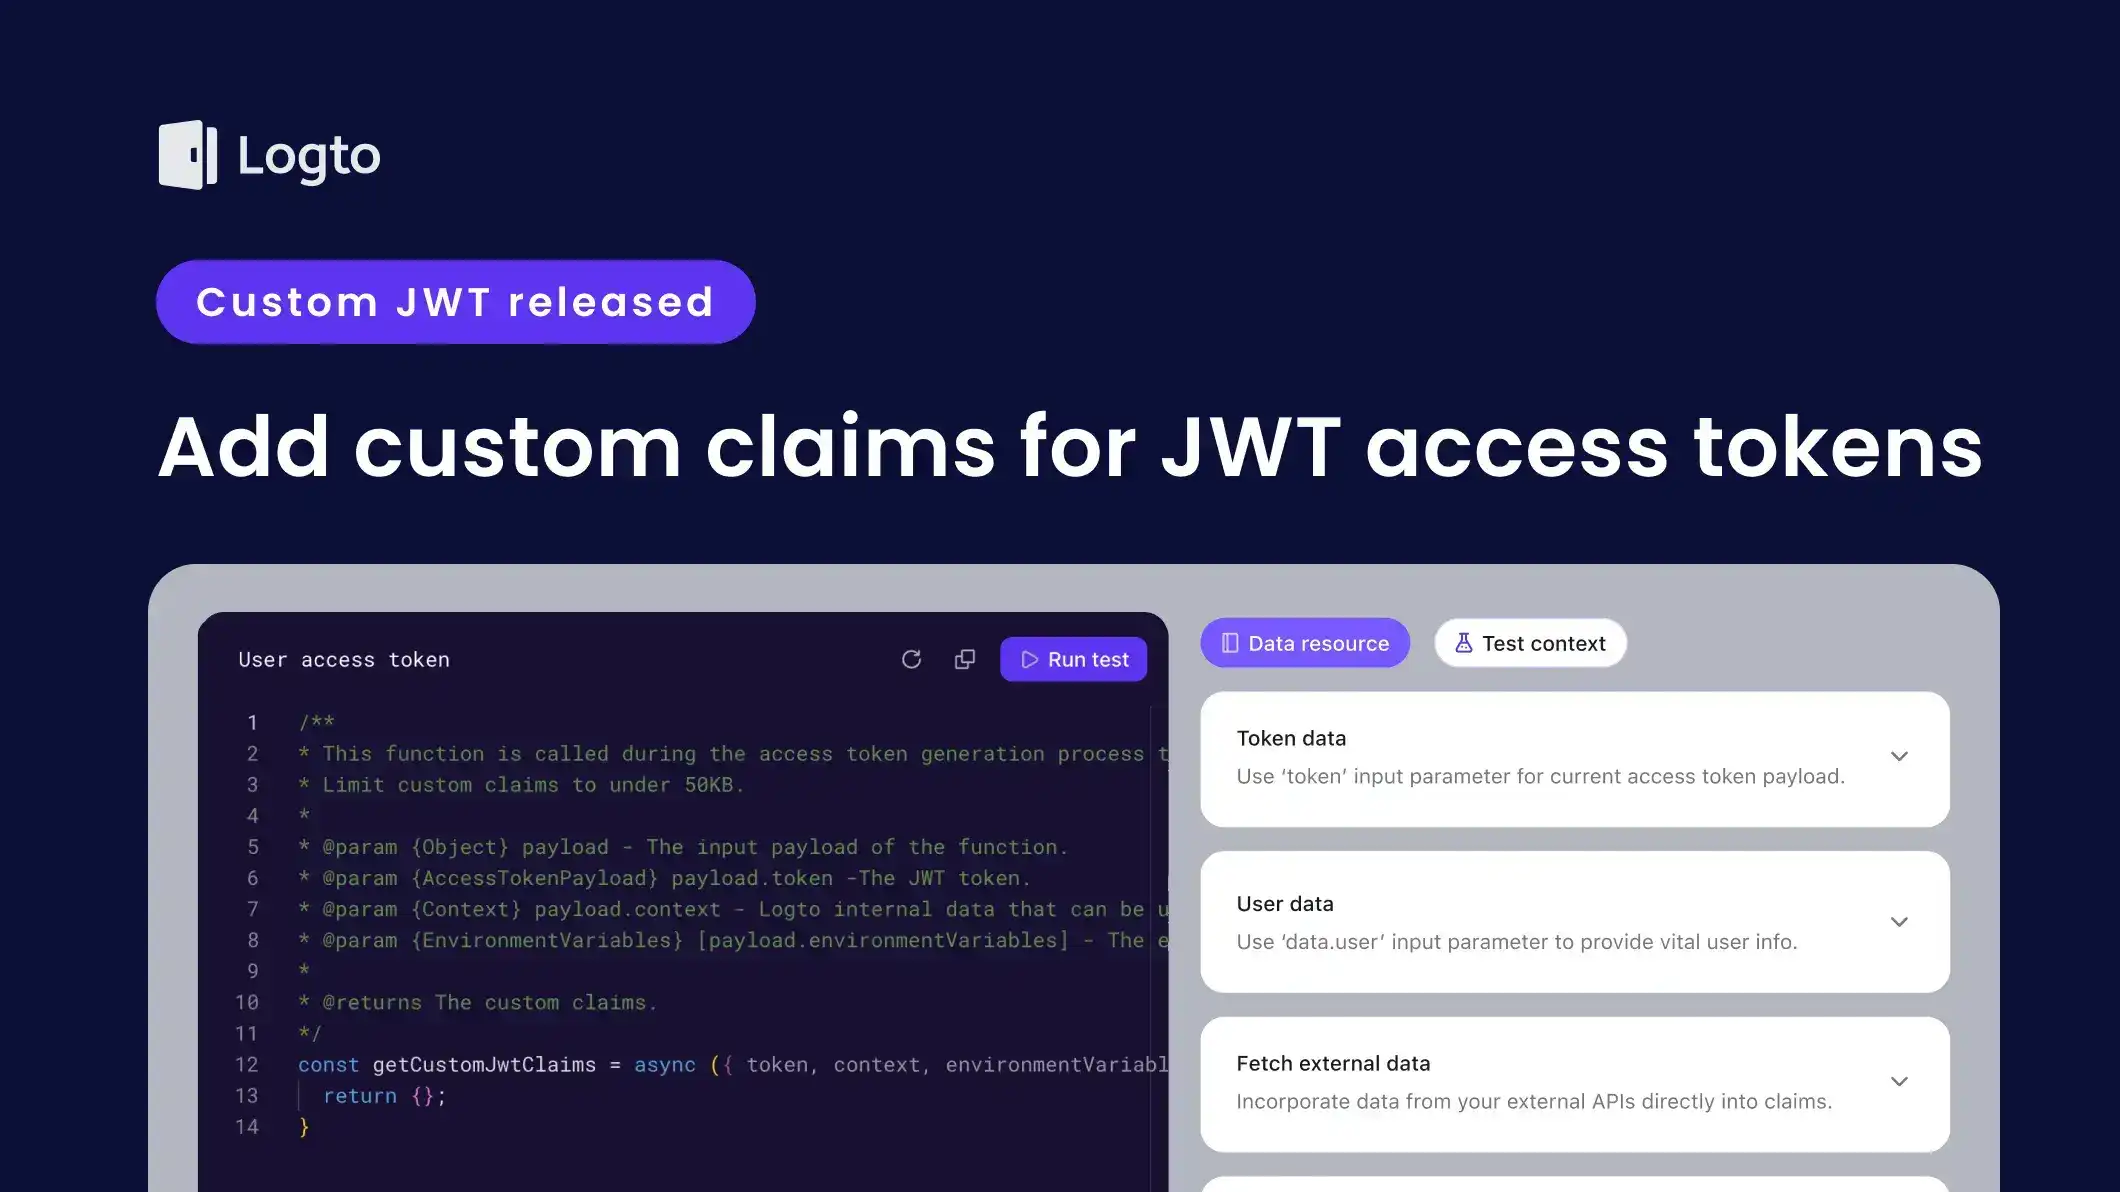 Add custom claims for JWT access tokens with Logto to boost your authorization